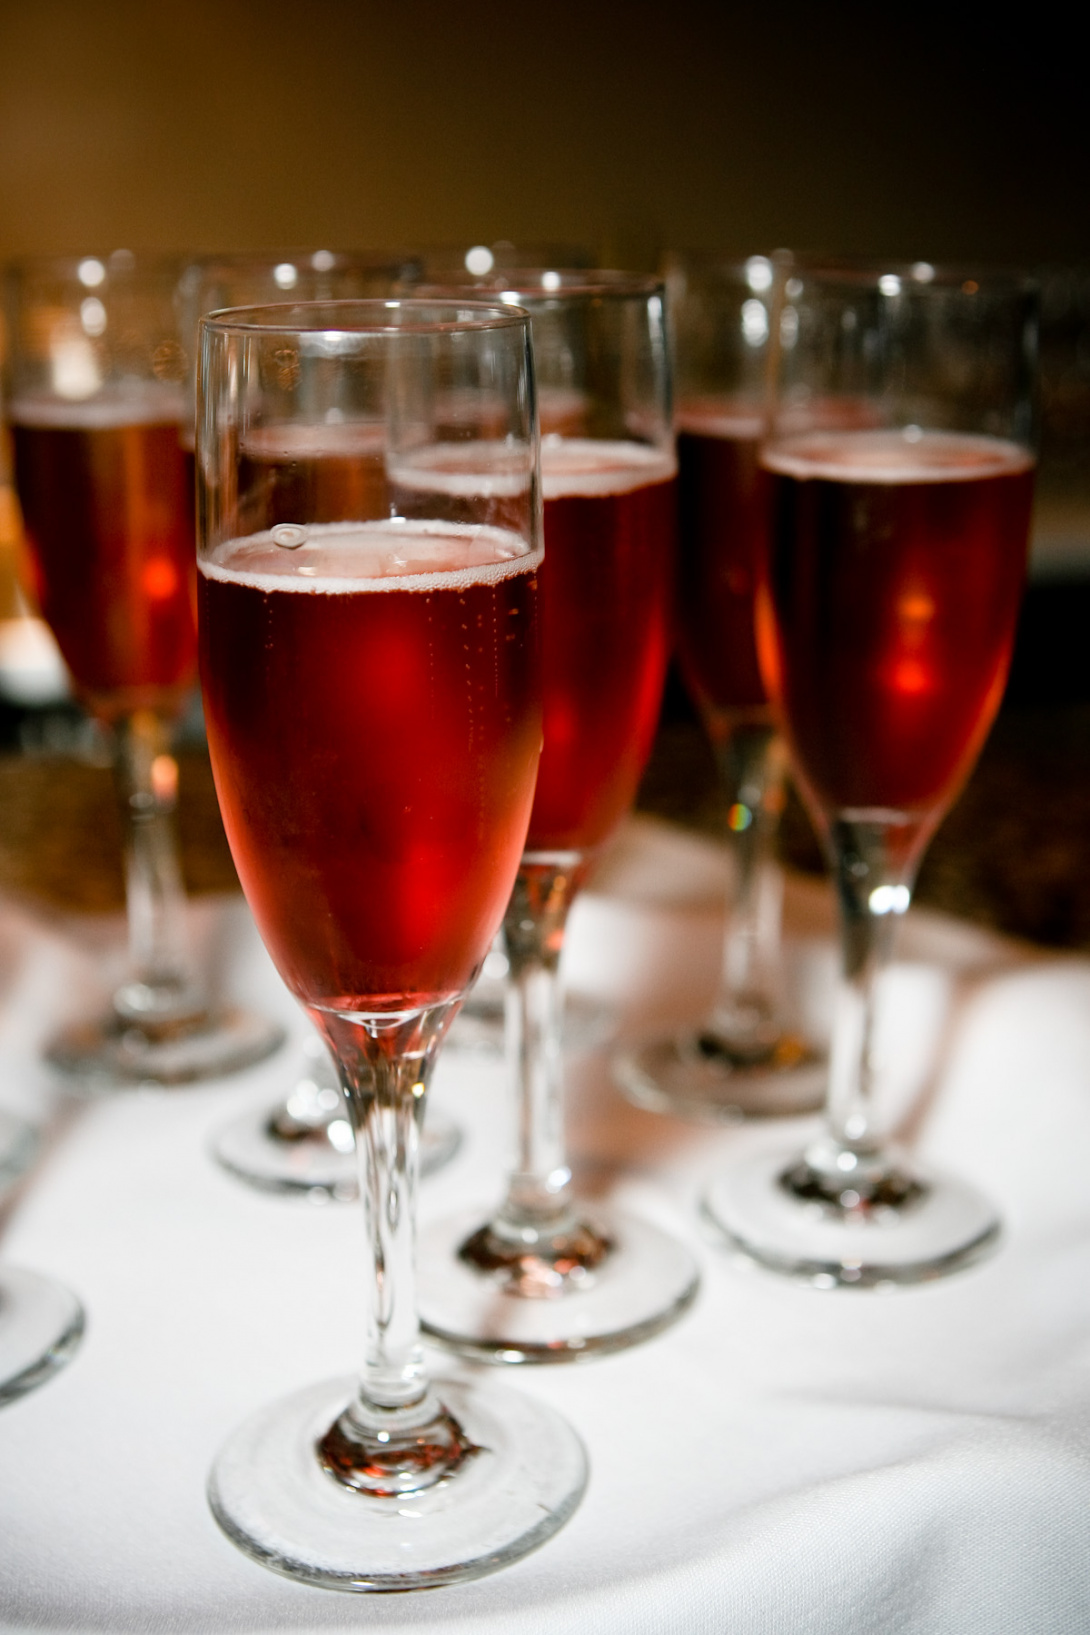 A series of glass champagne flutes with a cranberry-colored fizzy liquid bubbling away. One glass in the foreground is in sharp focus, 4–5 others stand behind it. The glasses sit on a tablecloth, the table’s edge can just be seen behind the glasses. 